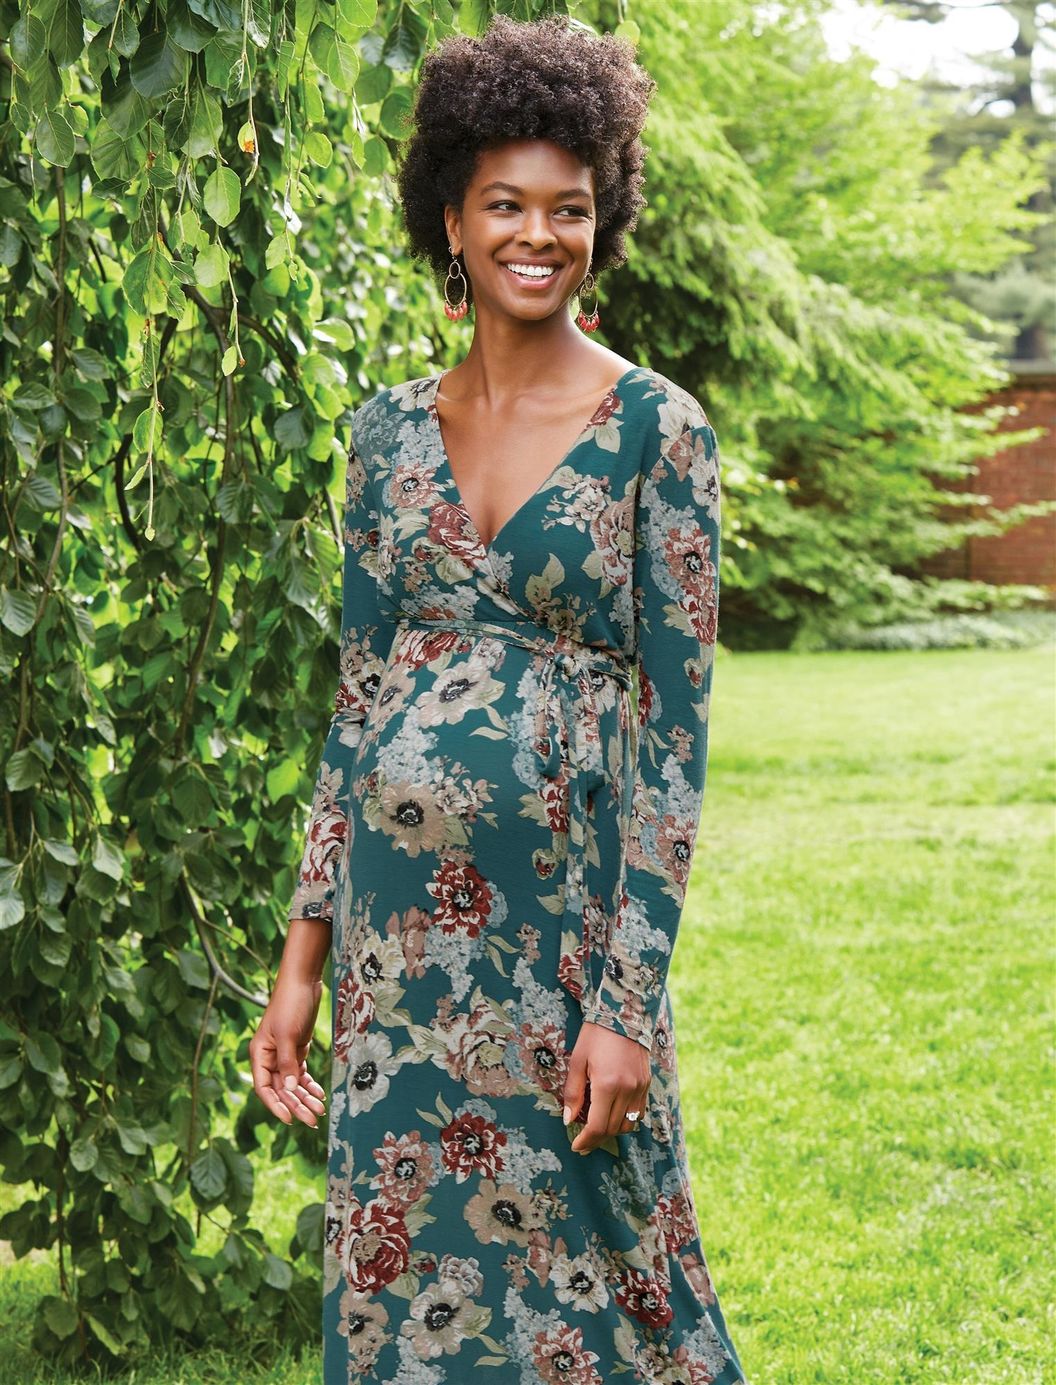 Are You Expecting? Here Are Some Maternity Clothes You'll Actually